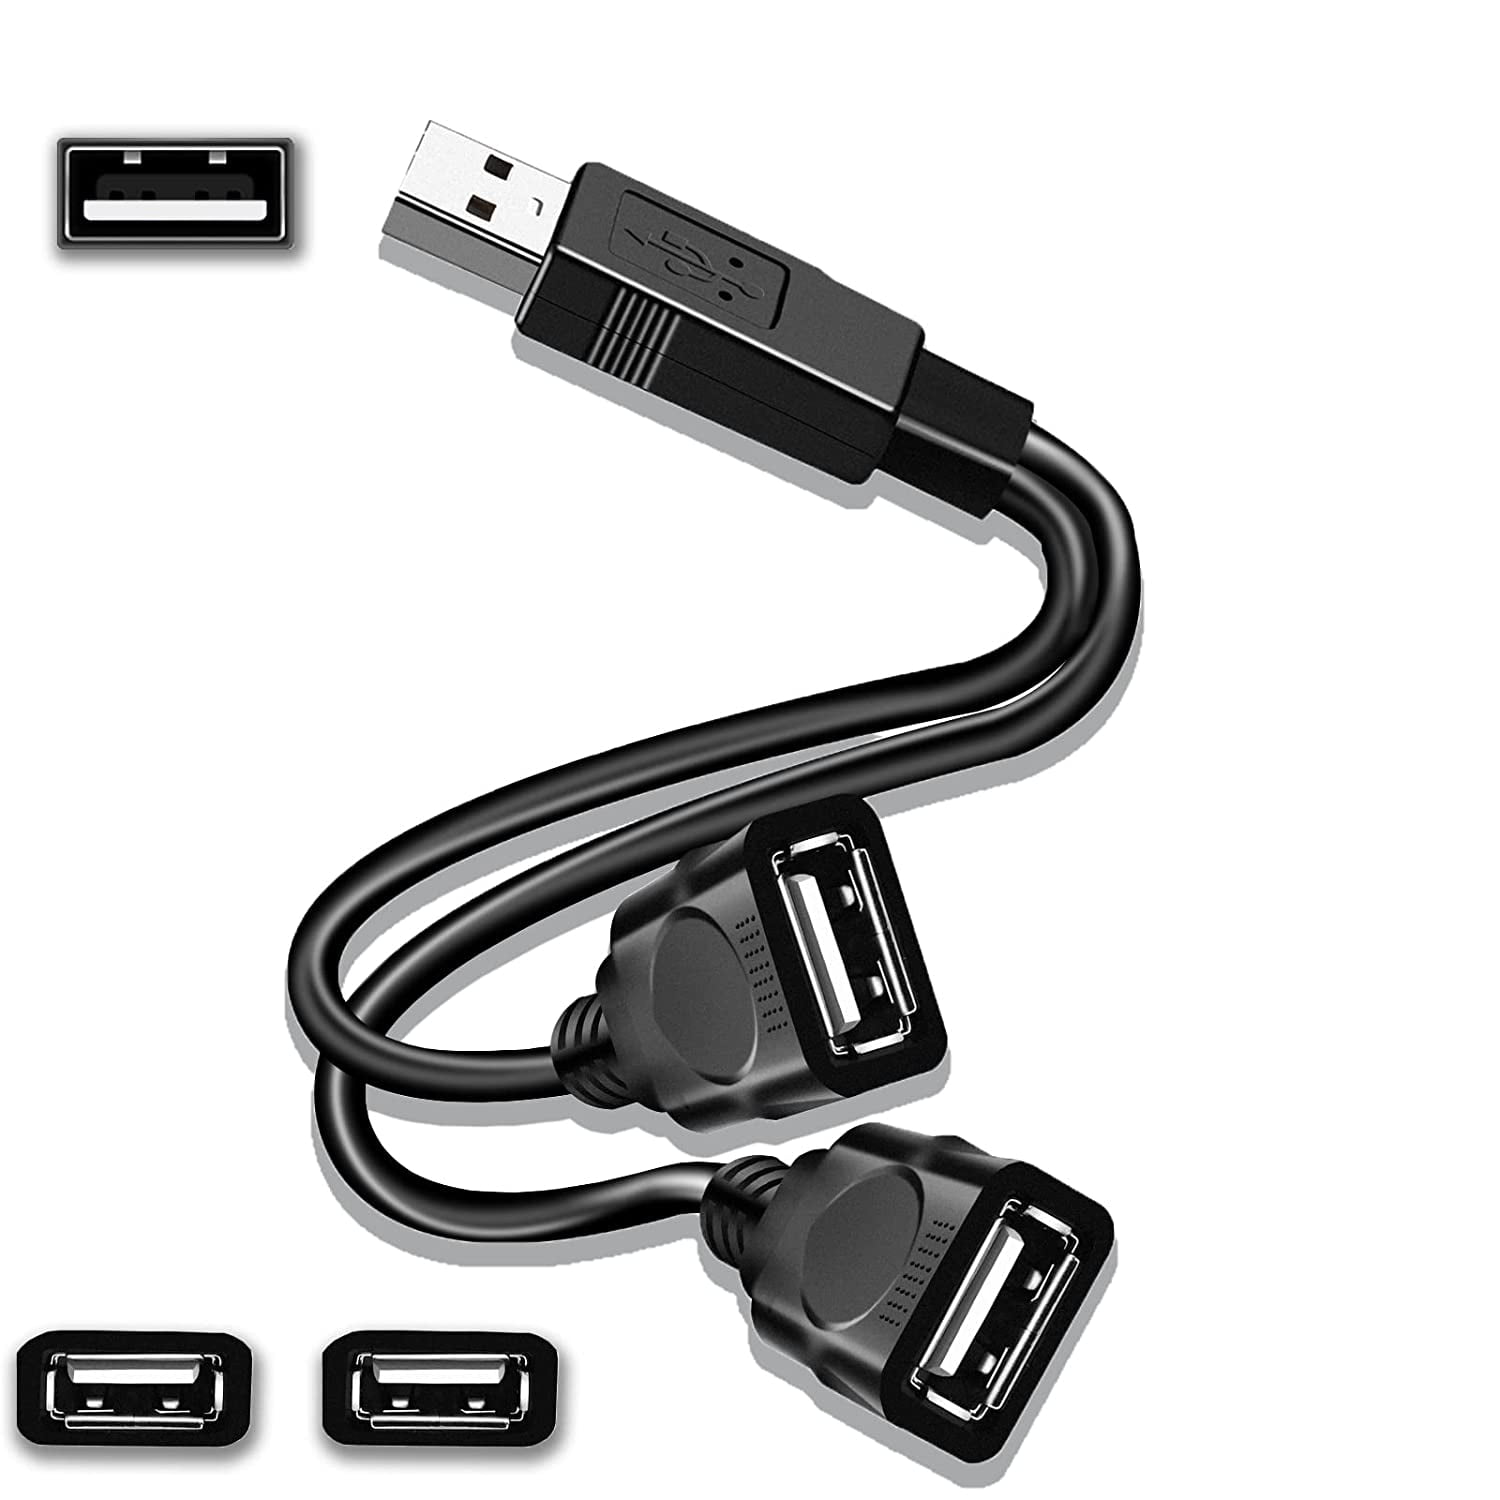 USB Splitter USB 2.0 Y Splitter A Male to Dual A Female Adapter Cable USB Y Cable Extension Cord - Walmart.com